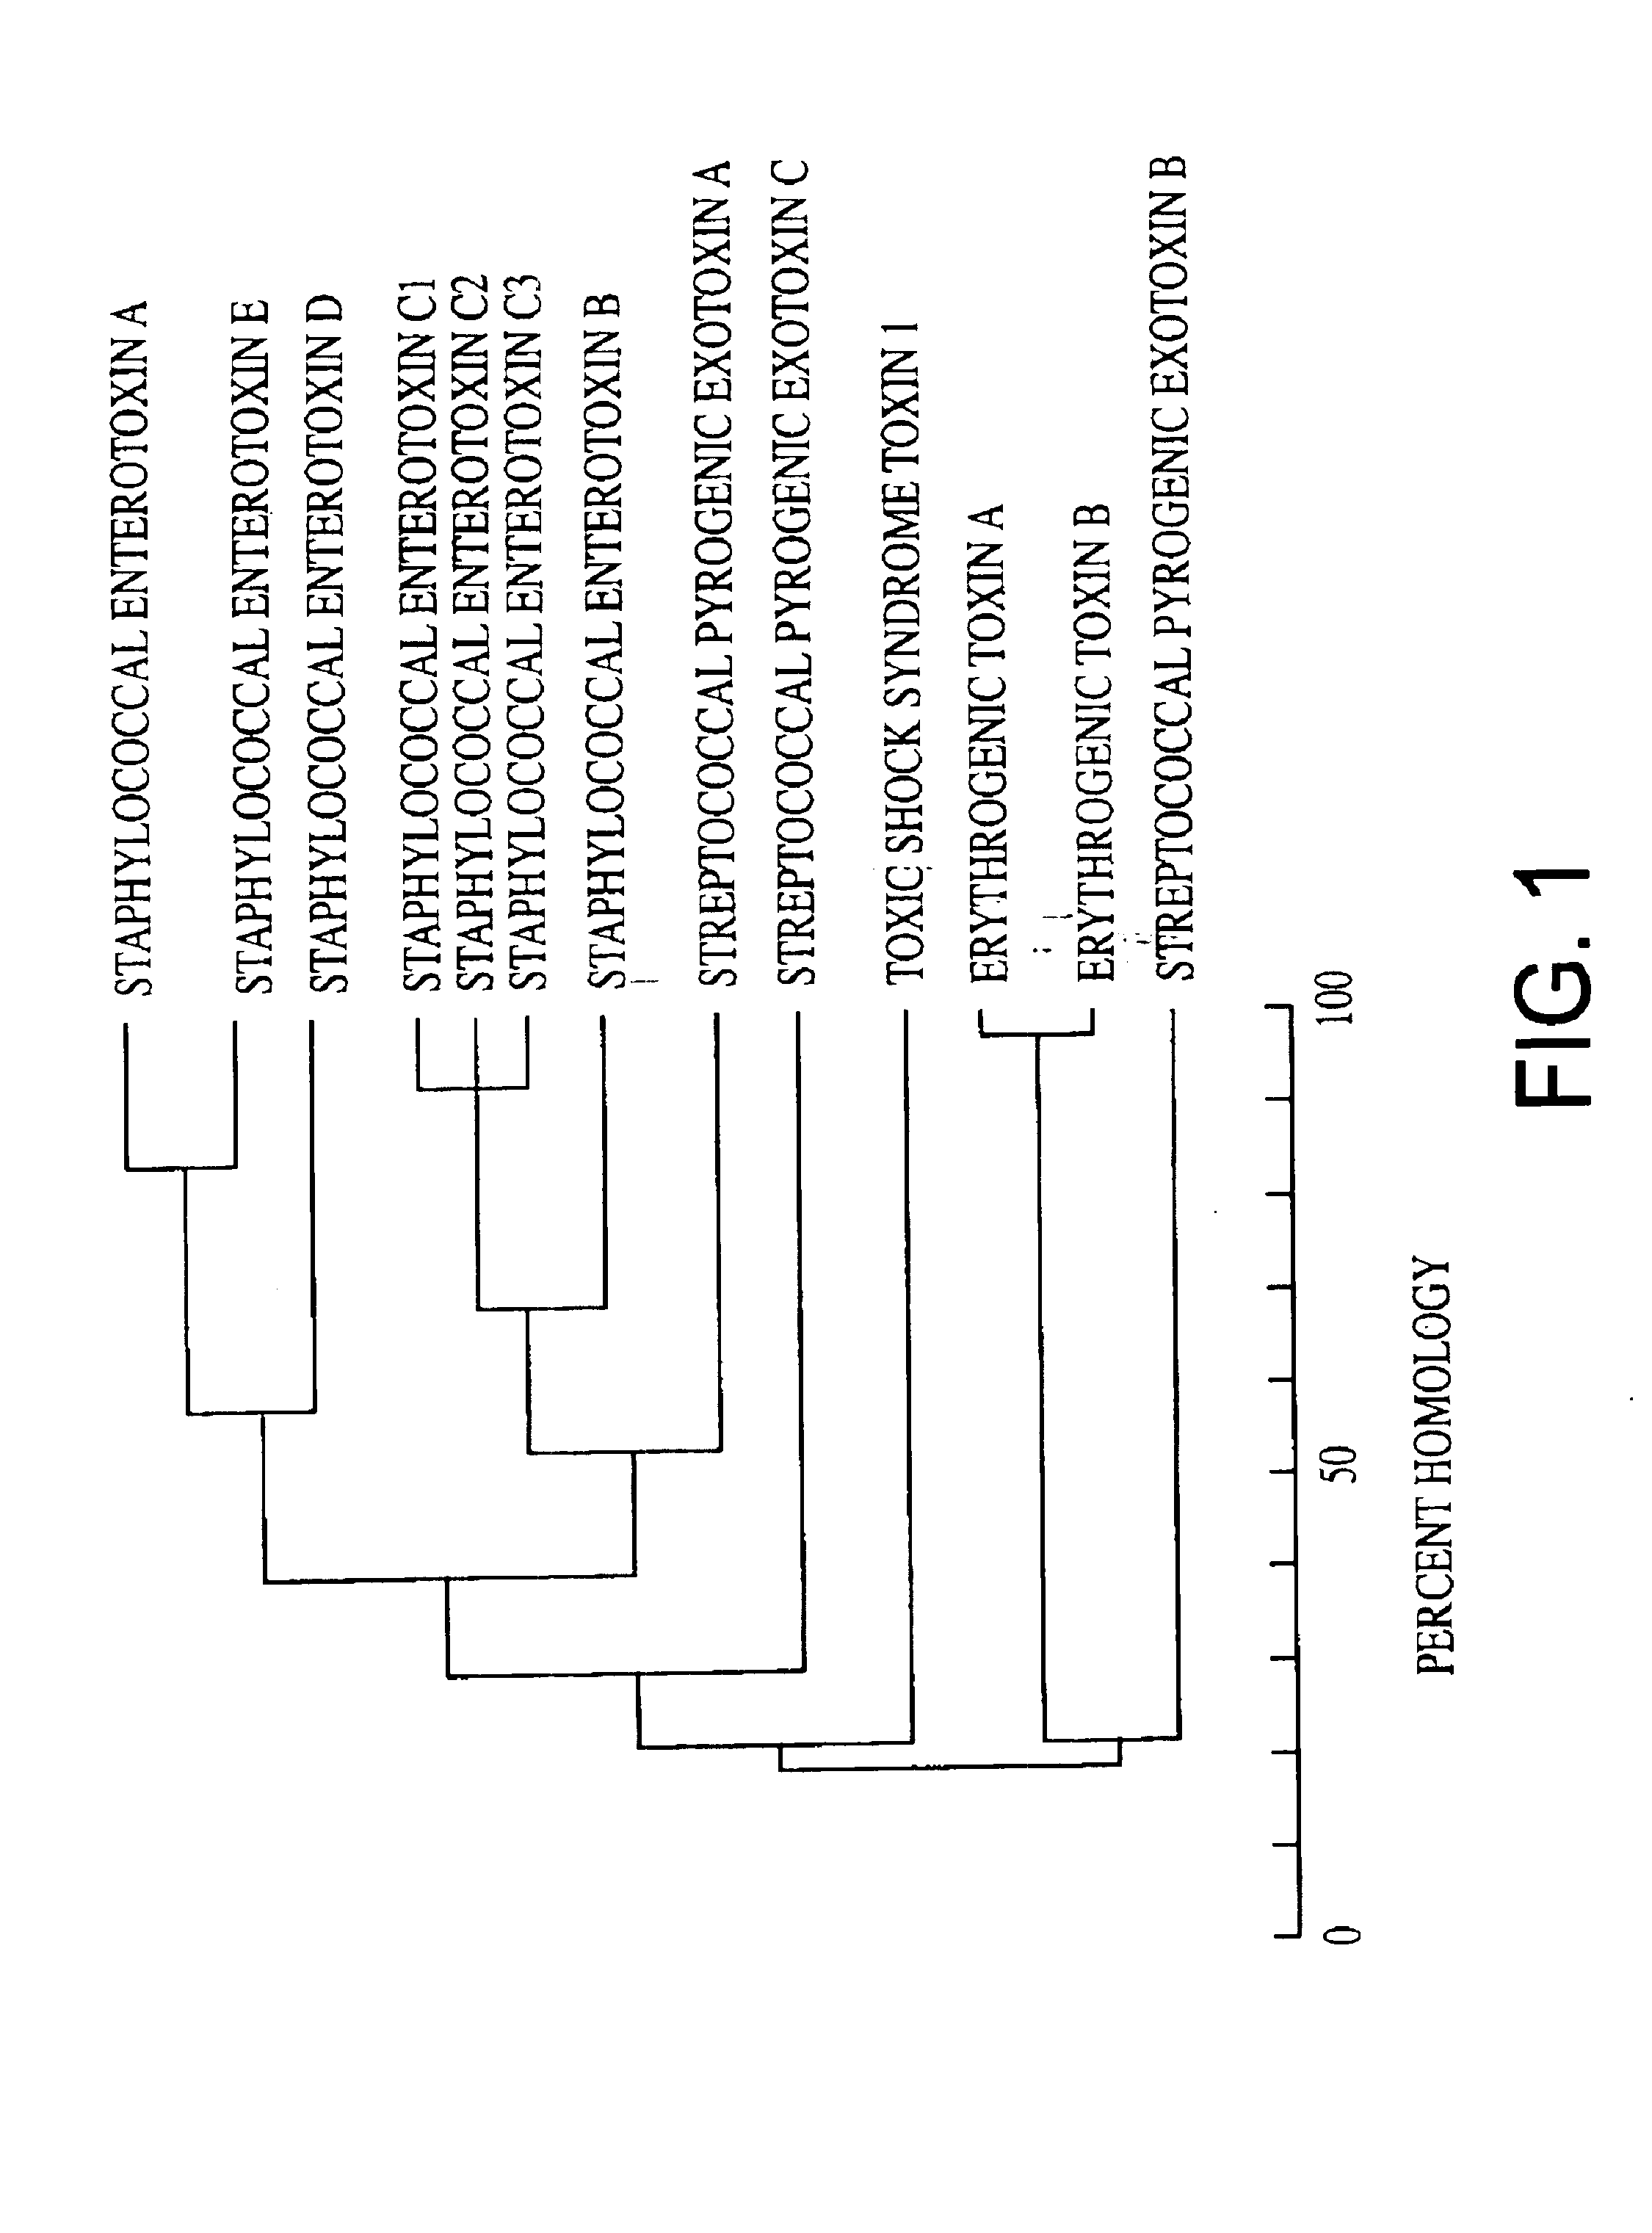 Fusion protein of streptococcal pyrogenic exotoxins